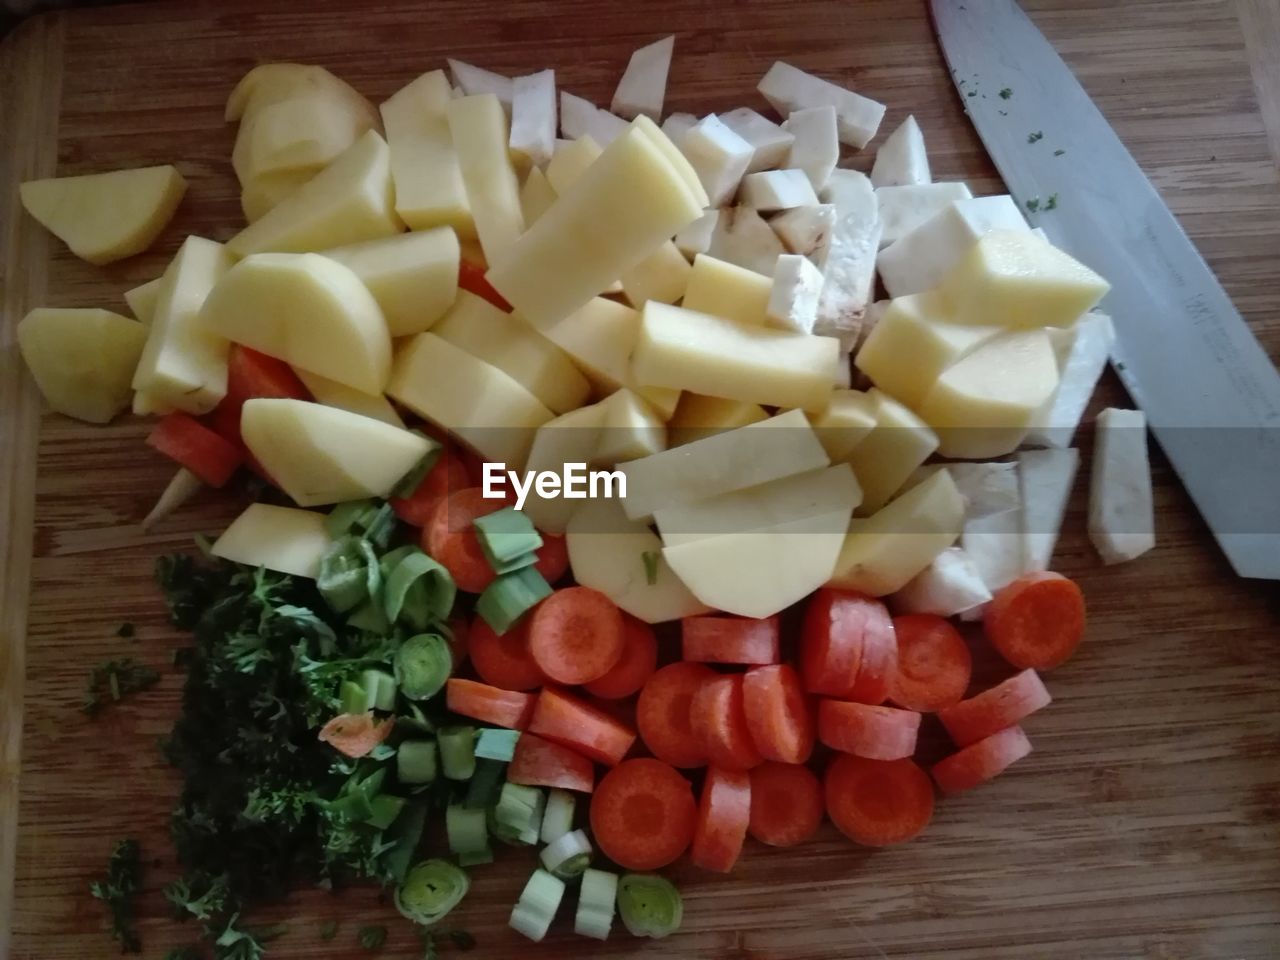 CLOSE-UP OF CHOPPED VEGETABLES ON TABLE